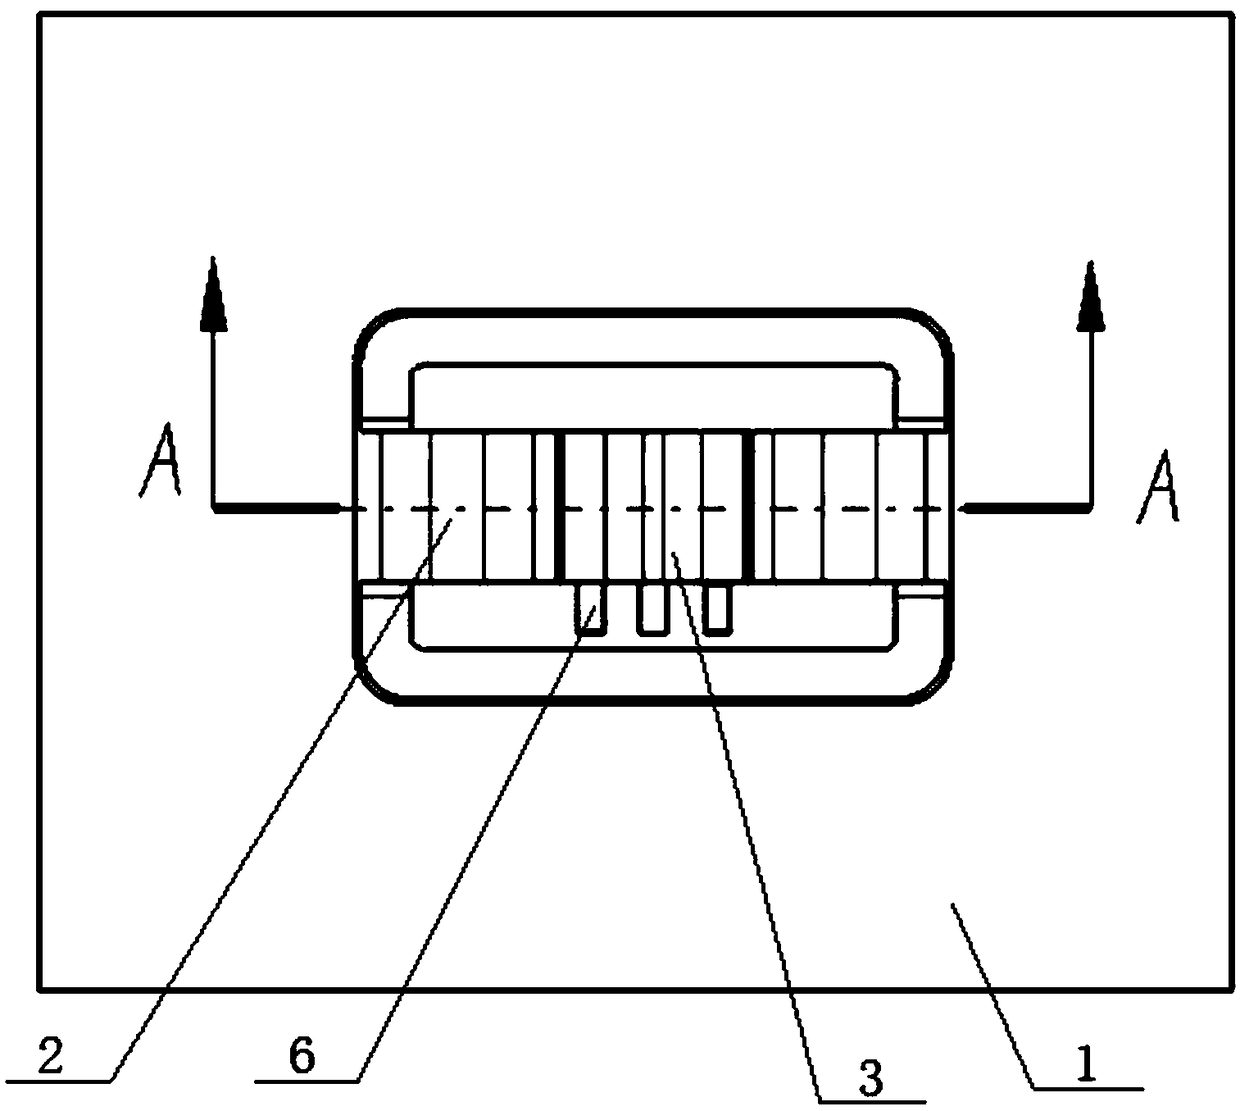 Installation structure capable of being repeatedly demounted